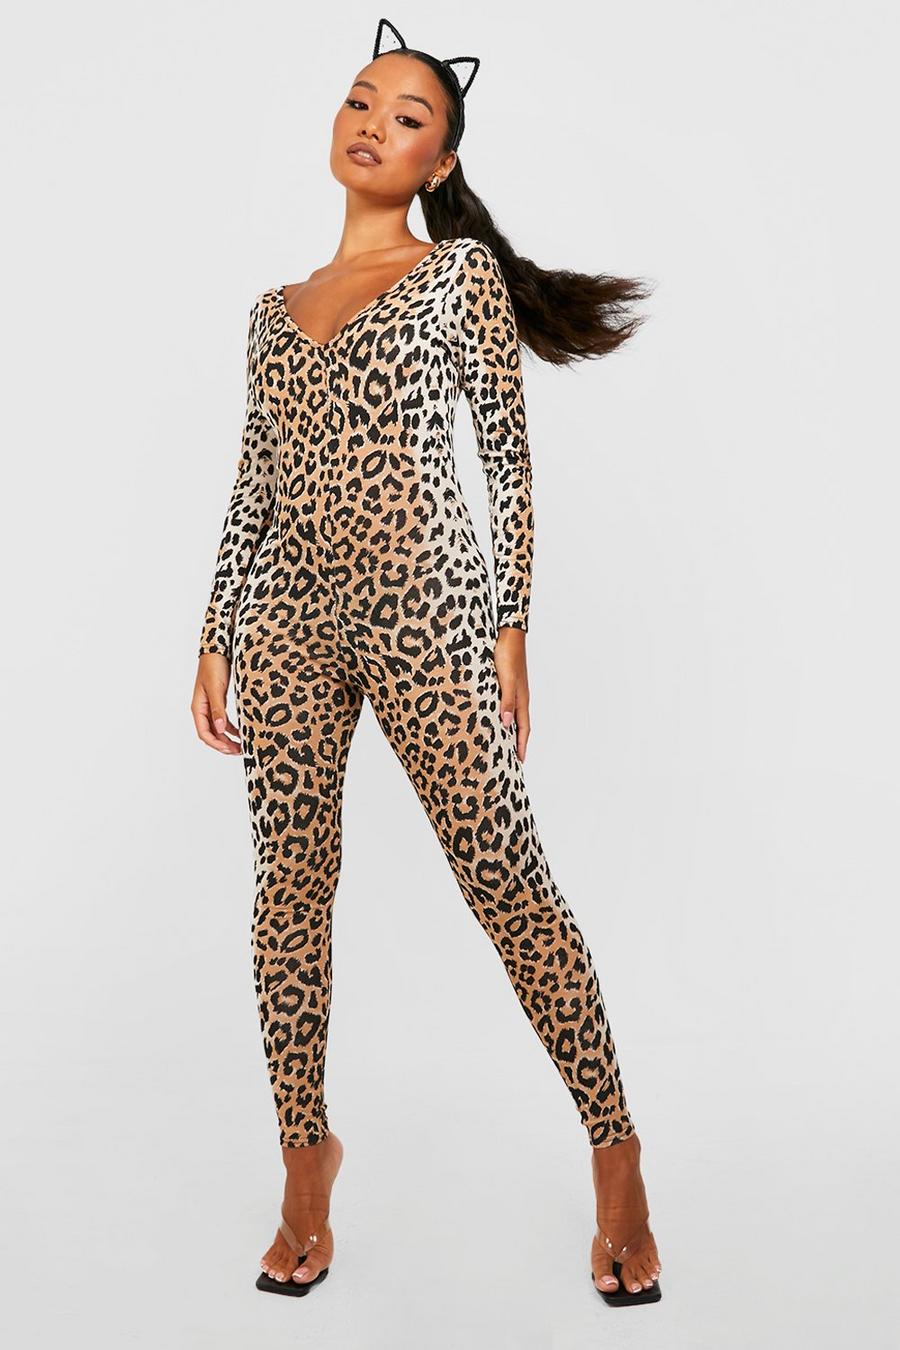 What Your Leopard Print Says About You